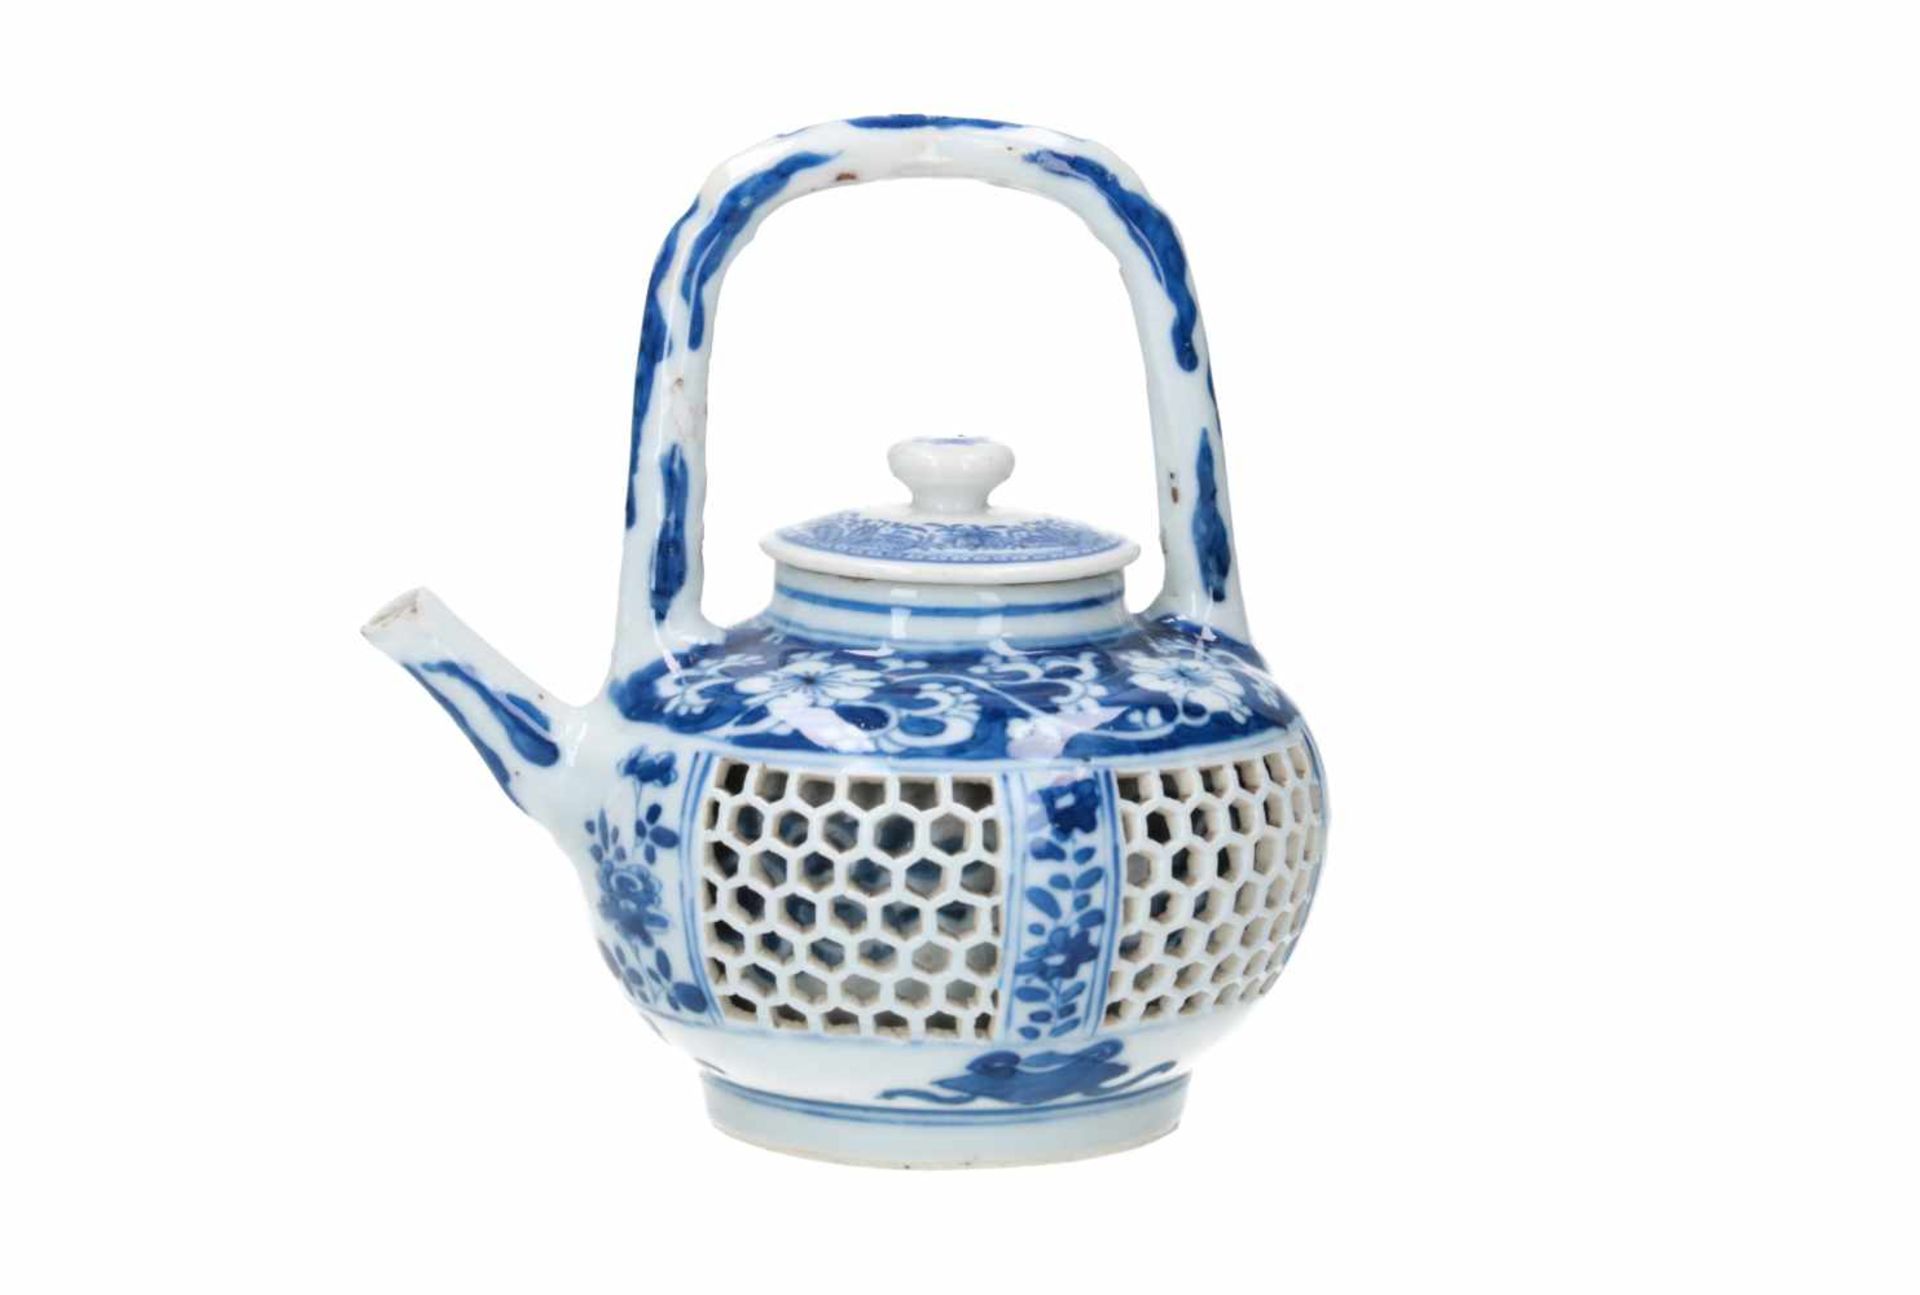 A blue and white porcelain teapot with open work belly, decorated with flowers and censers. Cover